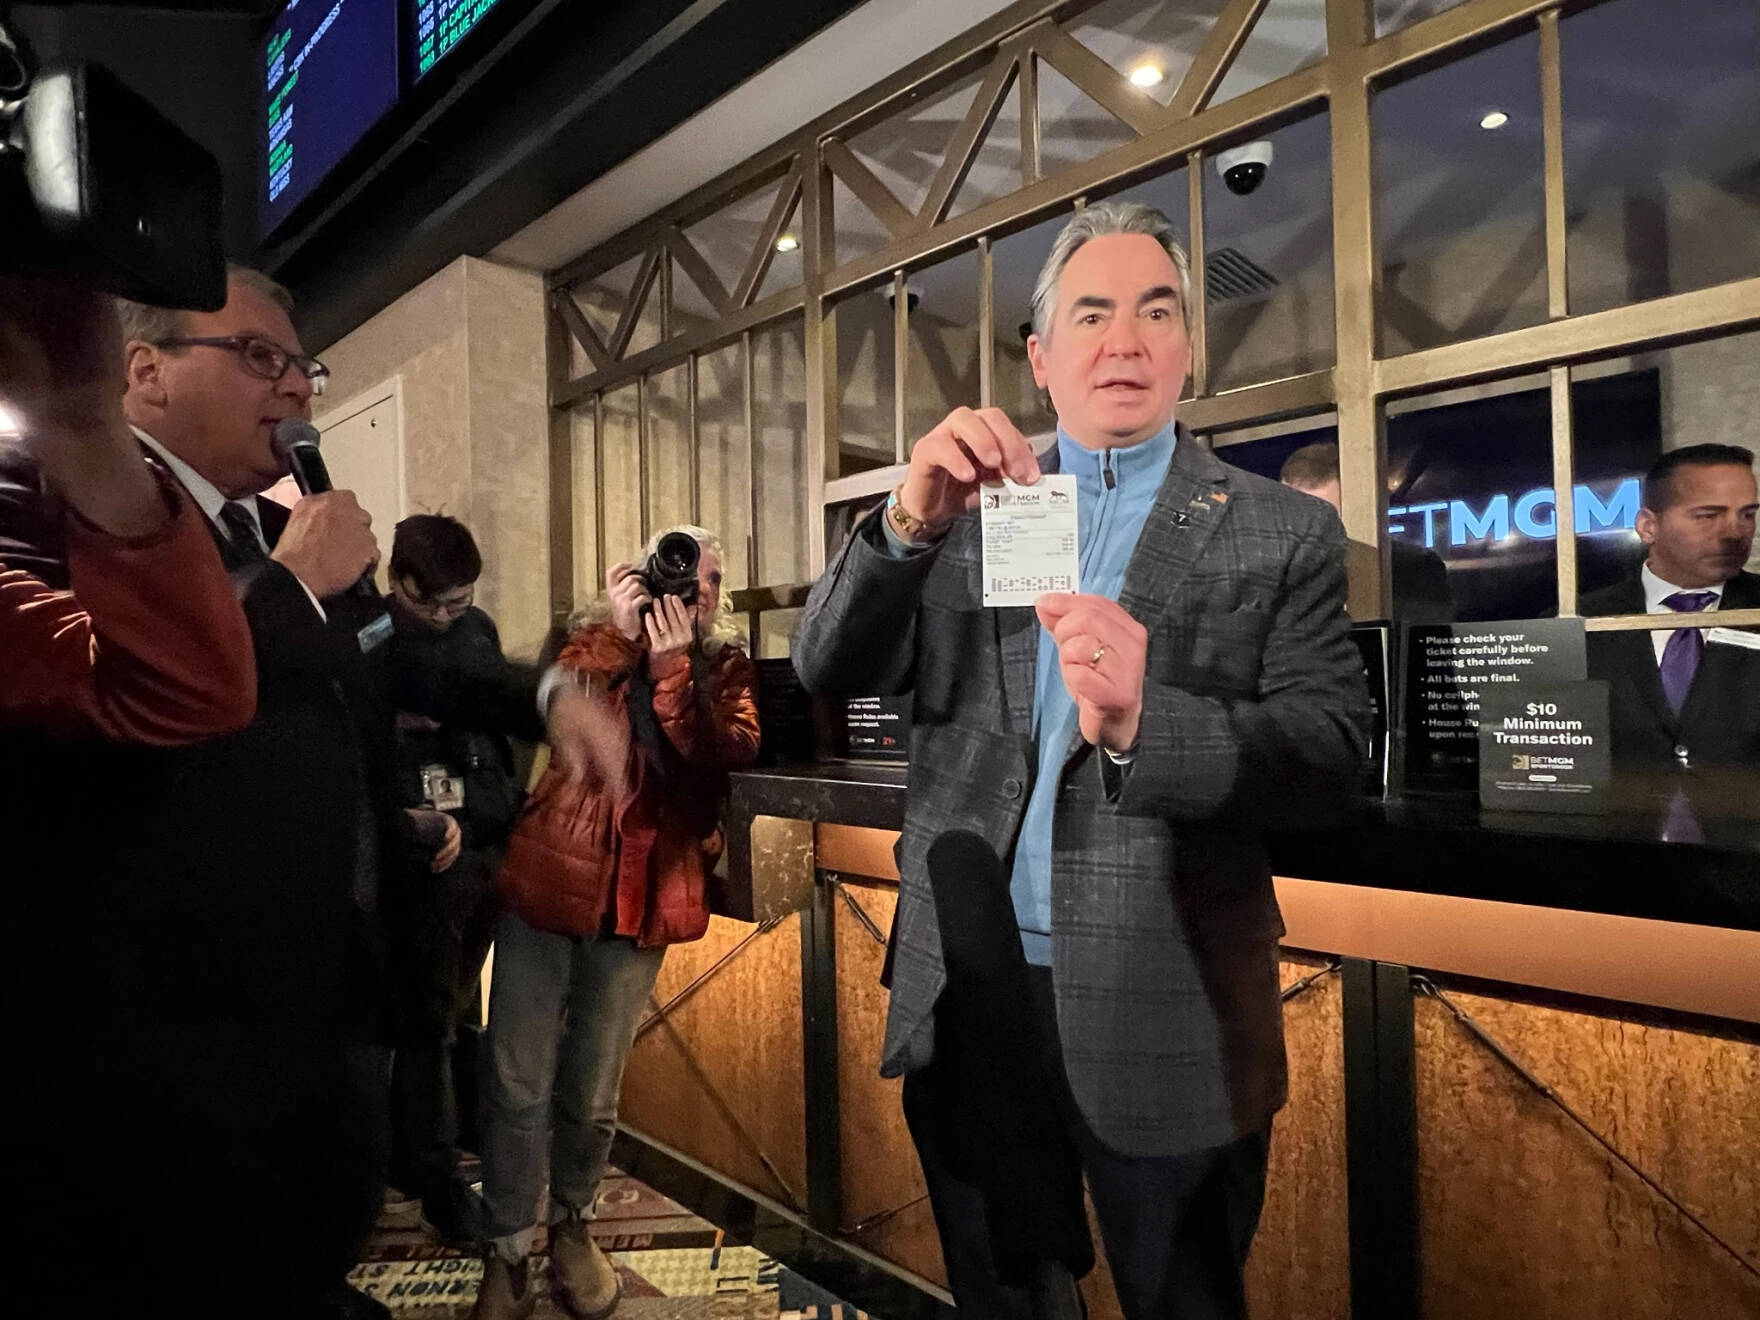 Springfield Mayor Domenic Sarno purchases the first sports betting ticket at MGM Springfield on Tuesday, Jan. 31, 2023. (Adam Frenier/NEPM)